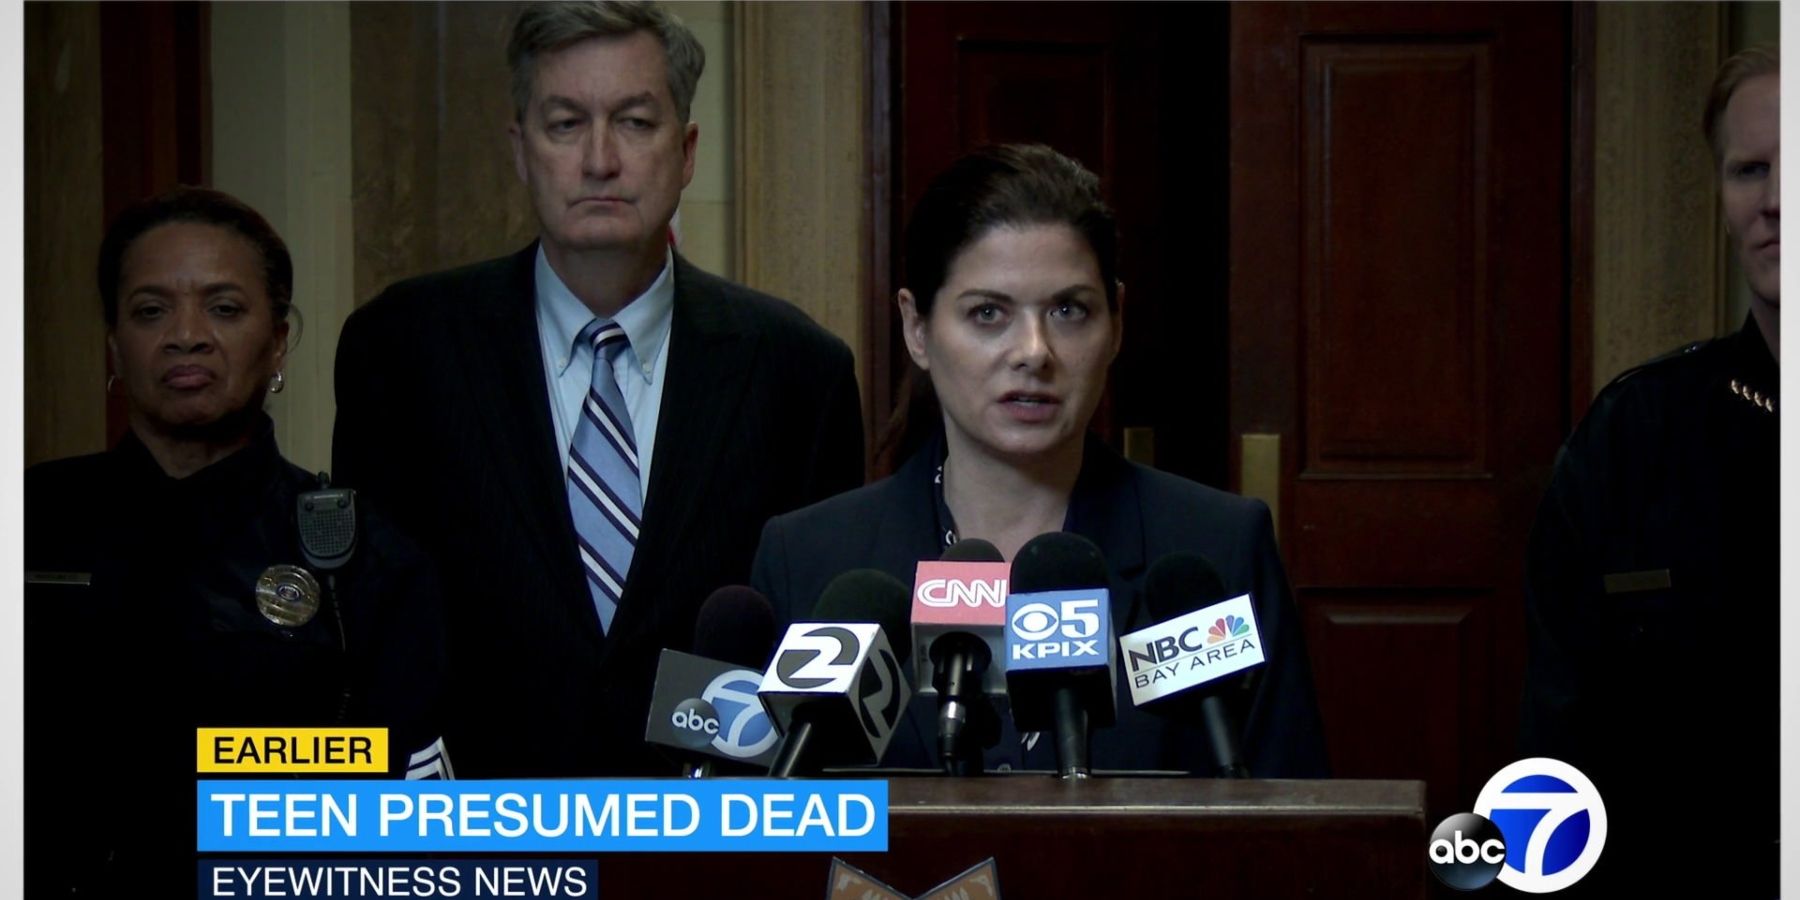 Debra Messing as Detective Vick in Searching